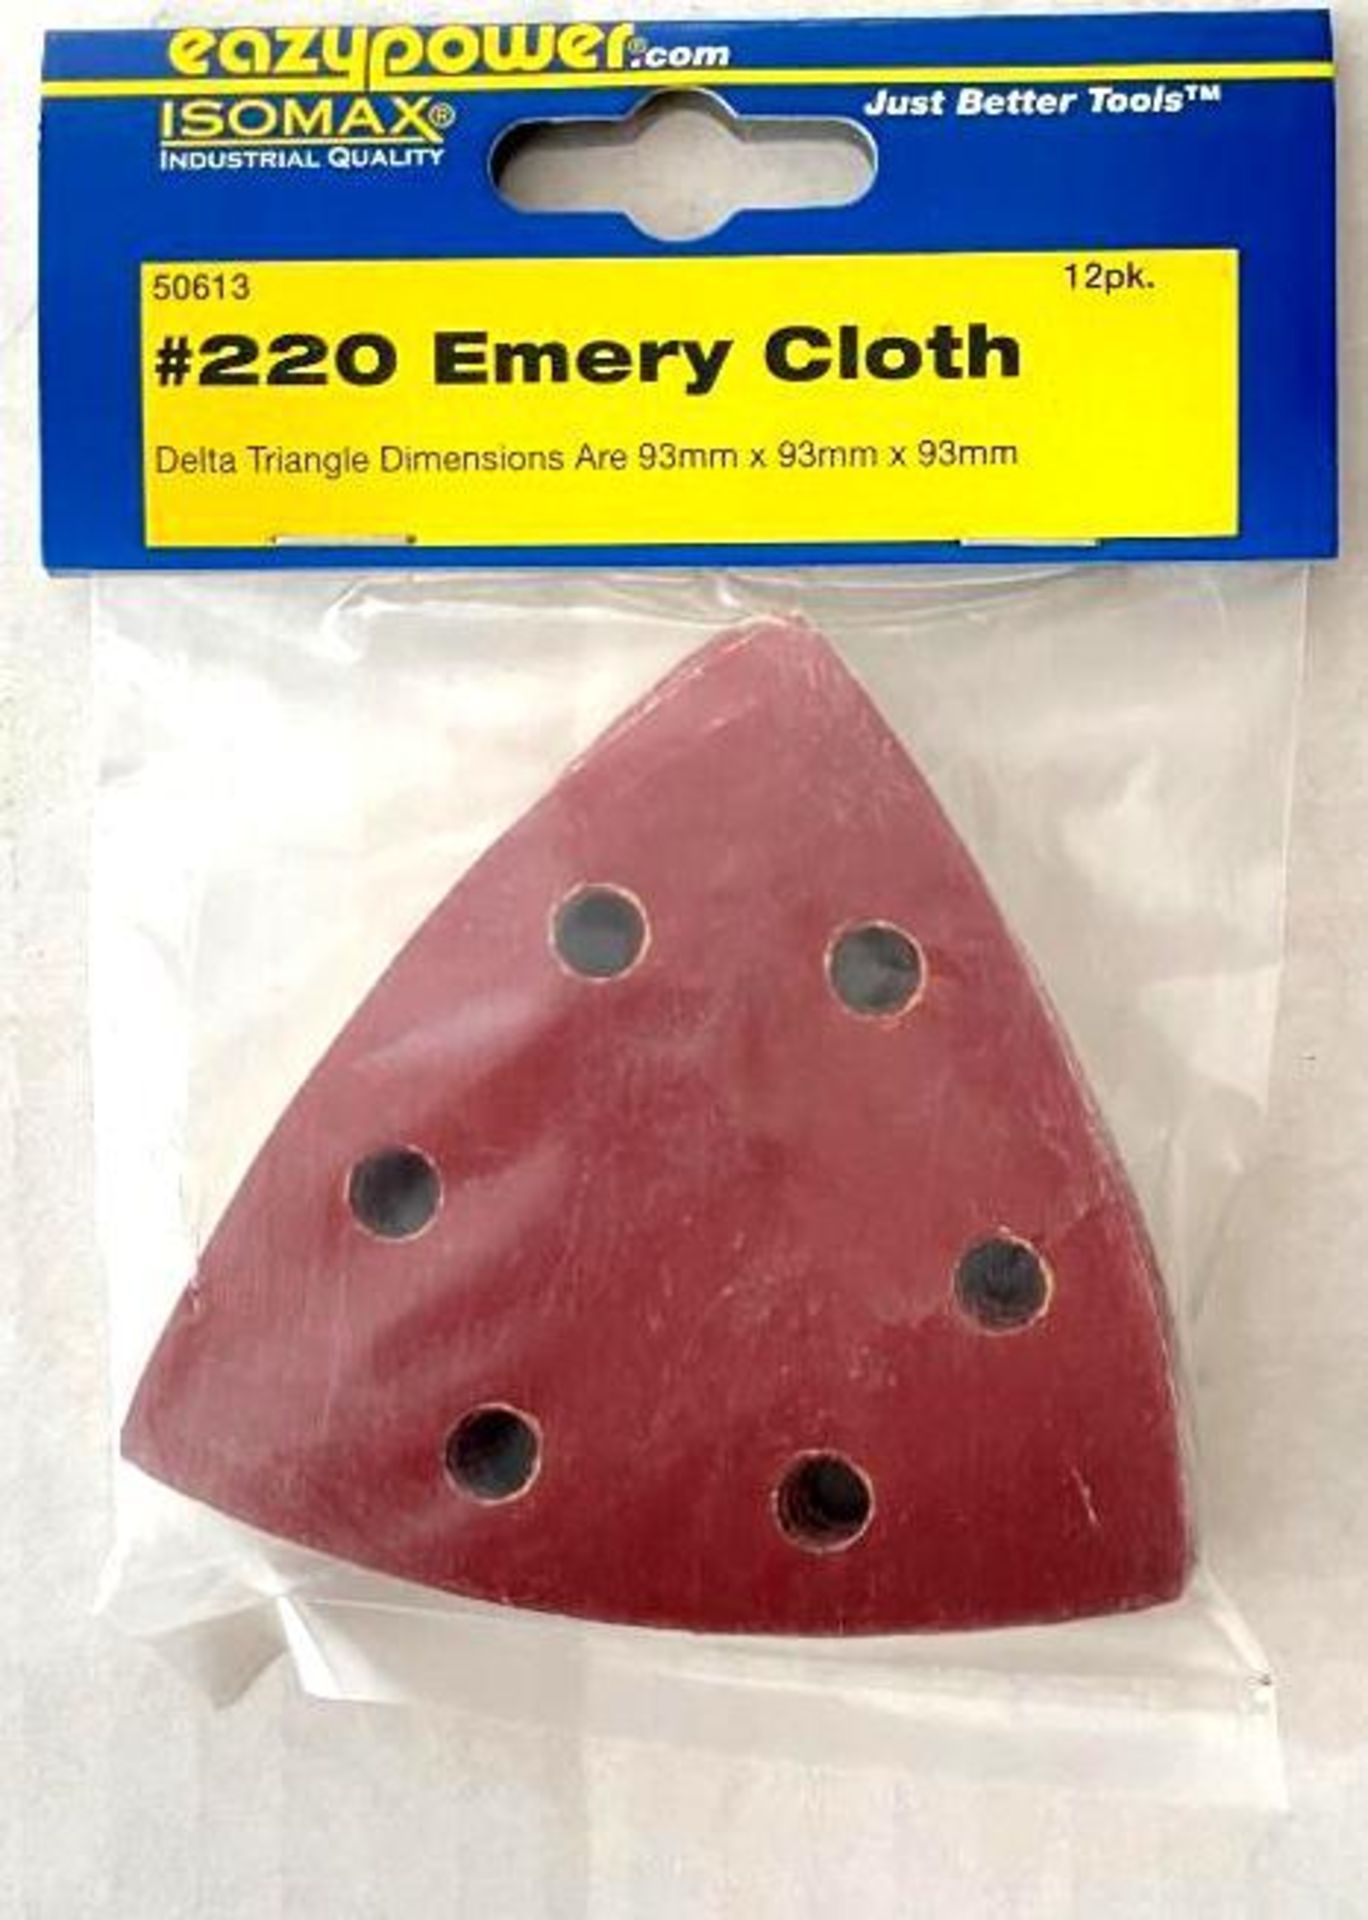 (300) 12PC PACKS OF 220 GRIT 3-5/8" EMERY SANDING CLOTH BRAND/MODEL EAZYPOWER 50613 ADDITIONAL INFO